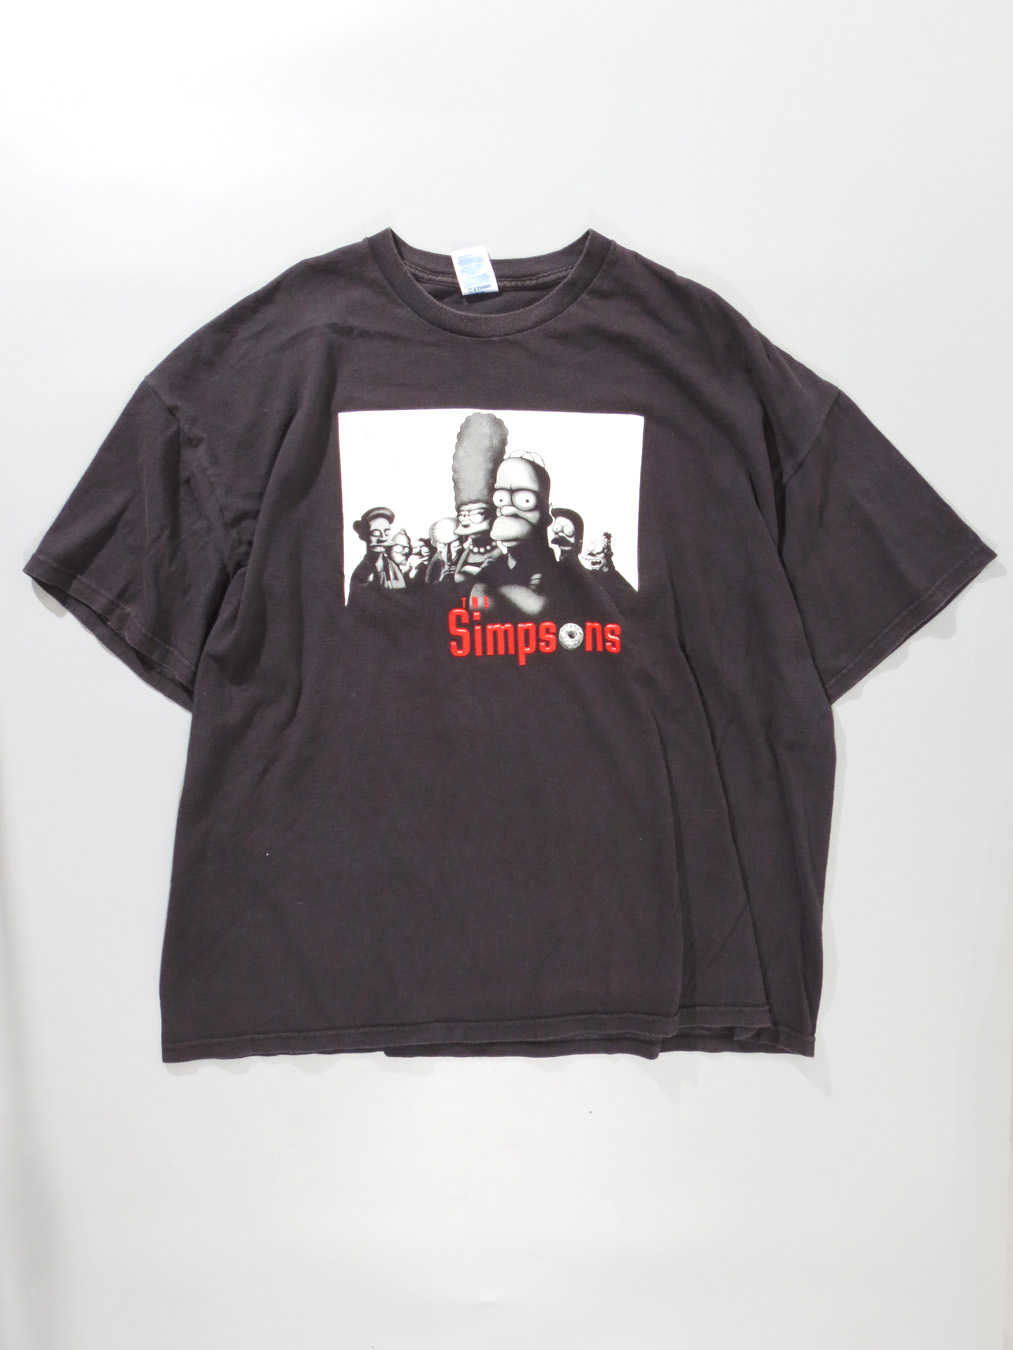 The Simpsons 'The Sopranos' T-Shirt - 5 Star Vintage